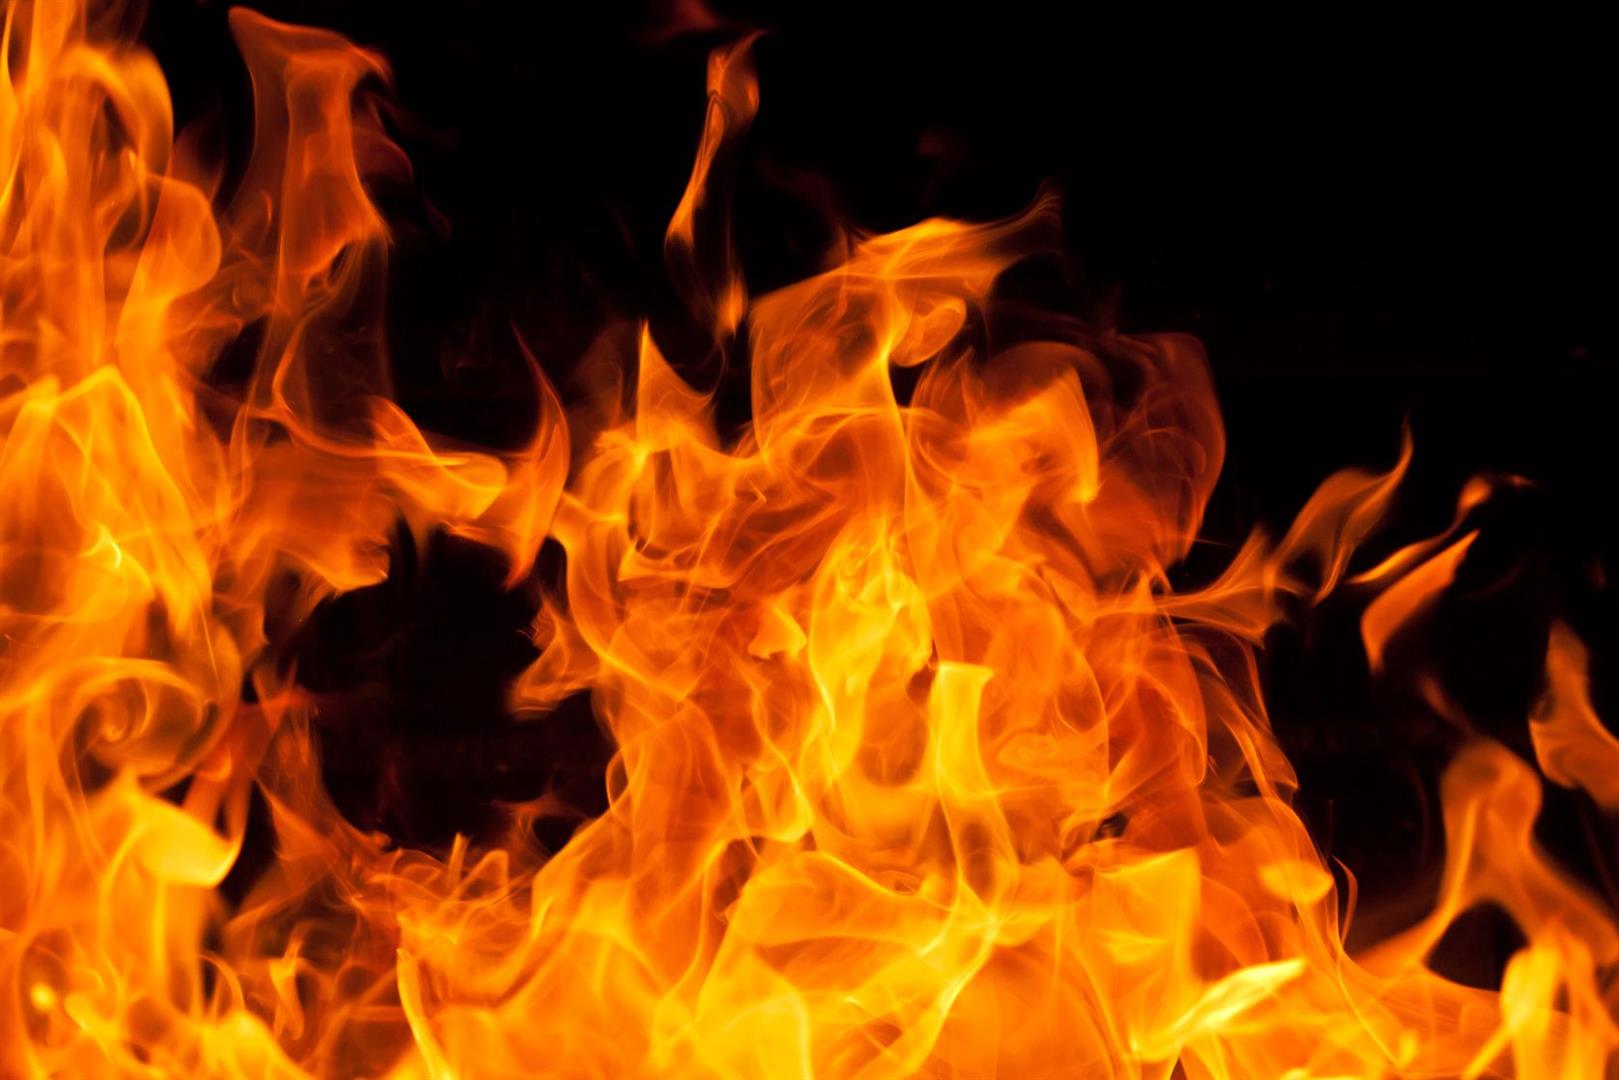 Man burns to death in Matale